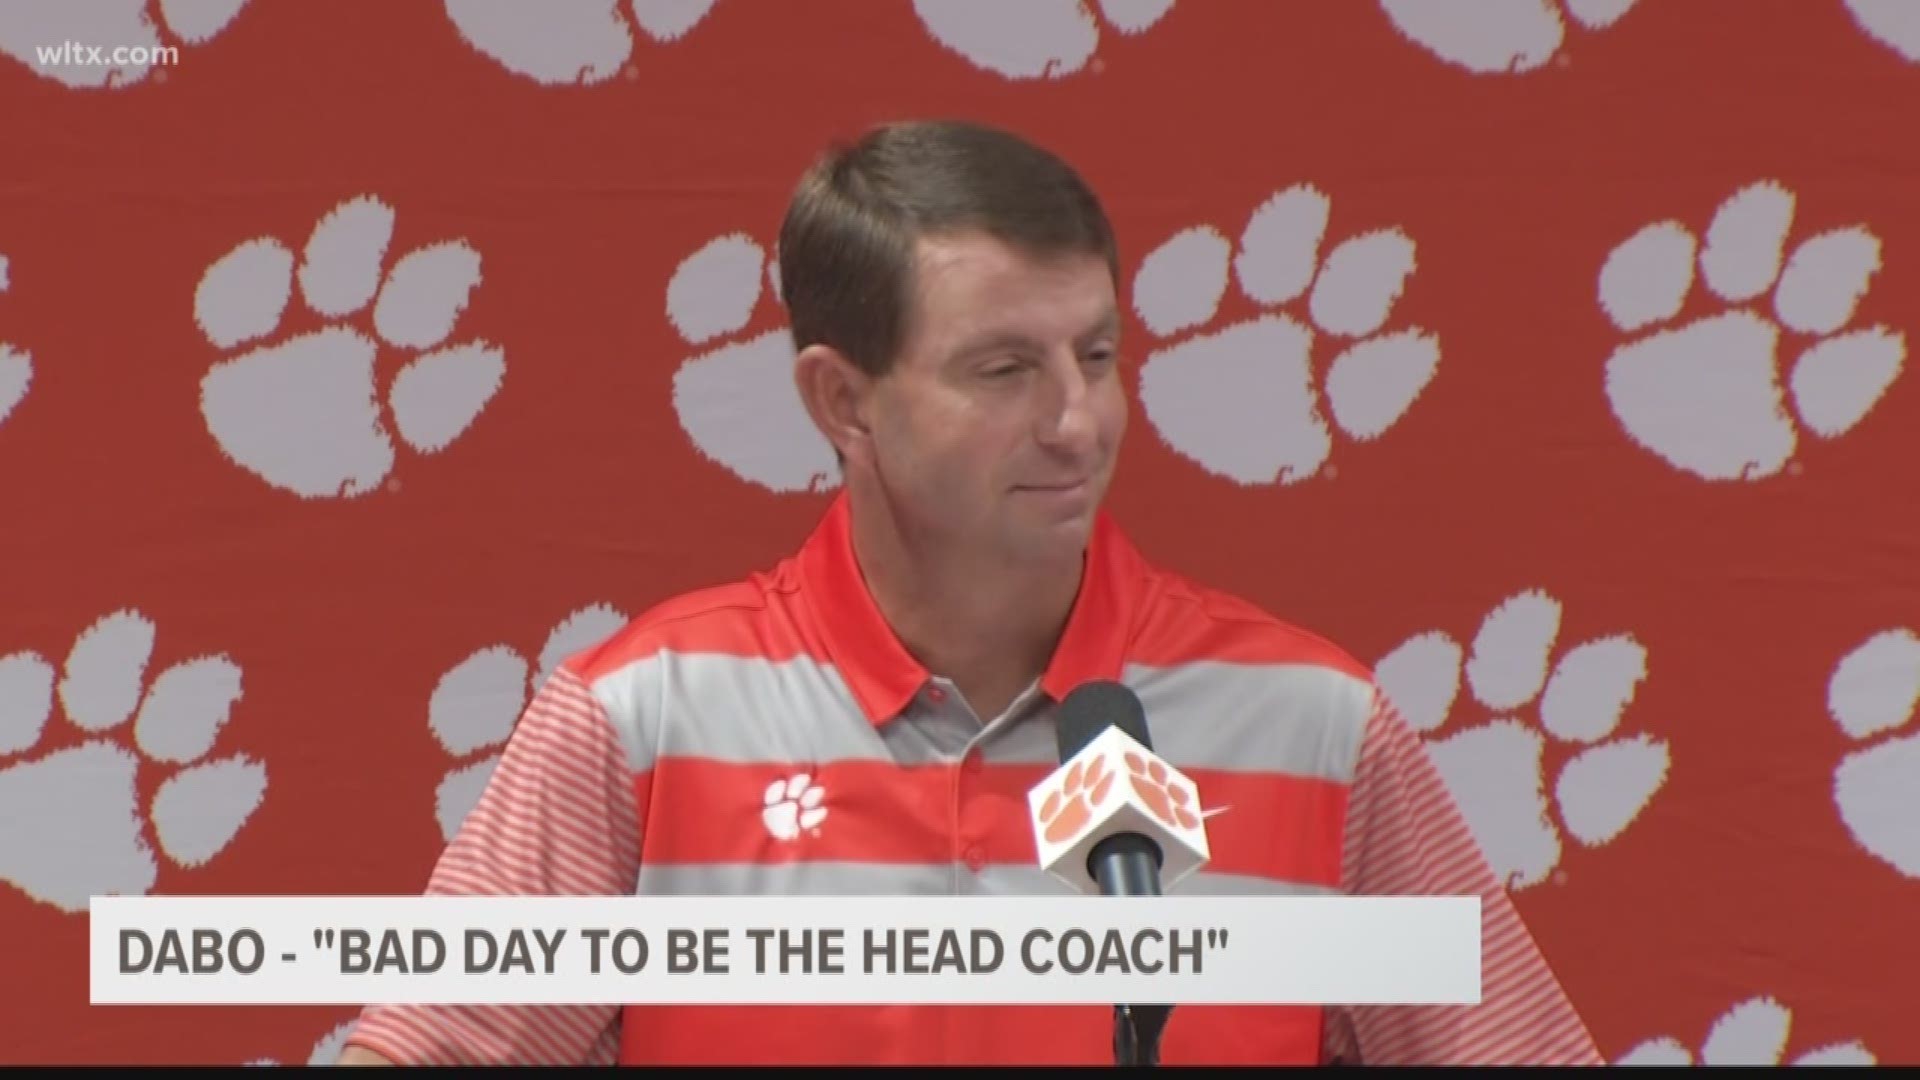 Clemson's Dabo Swinney says it's a "bad day to be the head coach" because he had to have a tough conversation with a player he loves like a son.